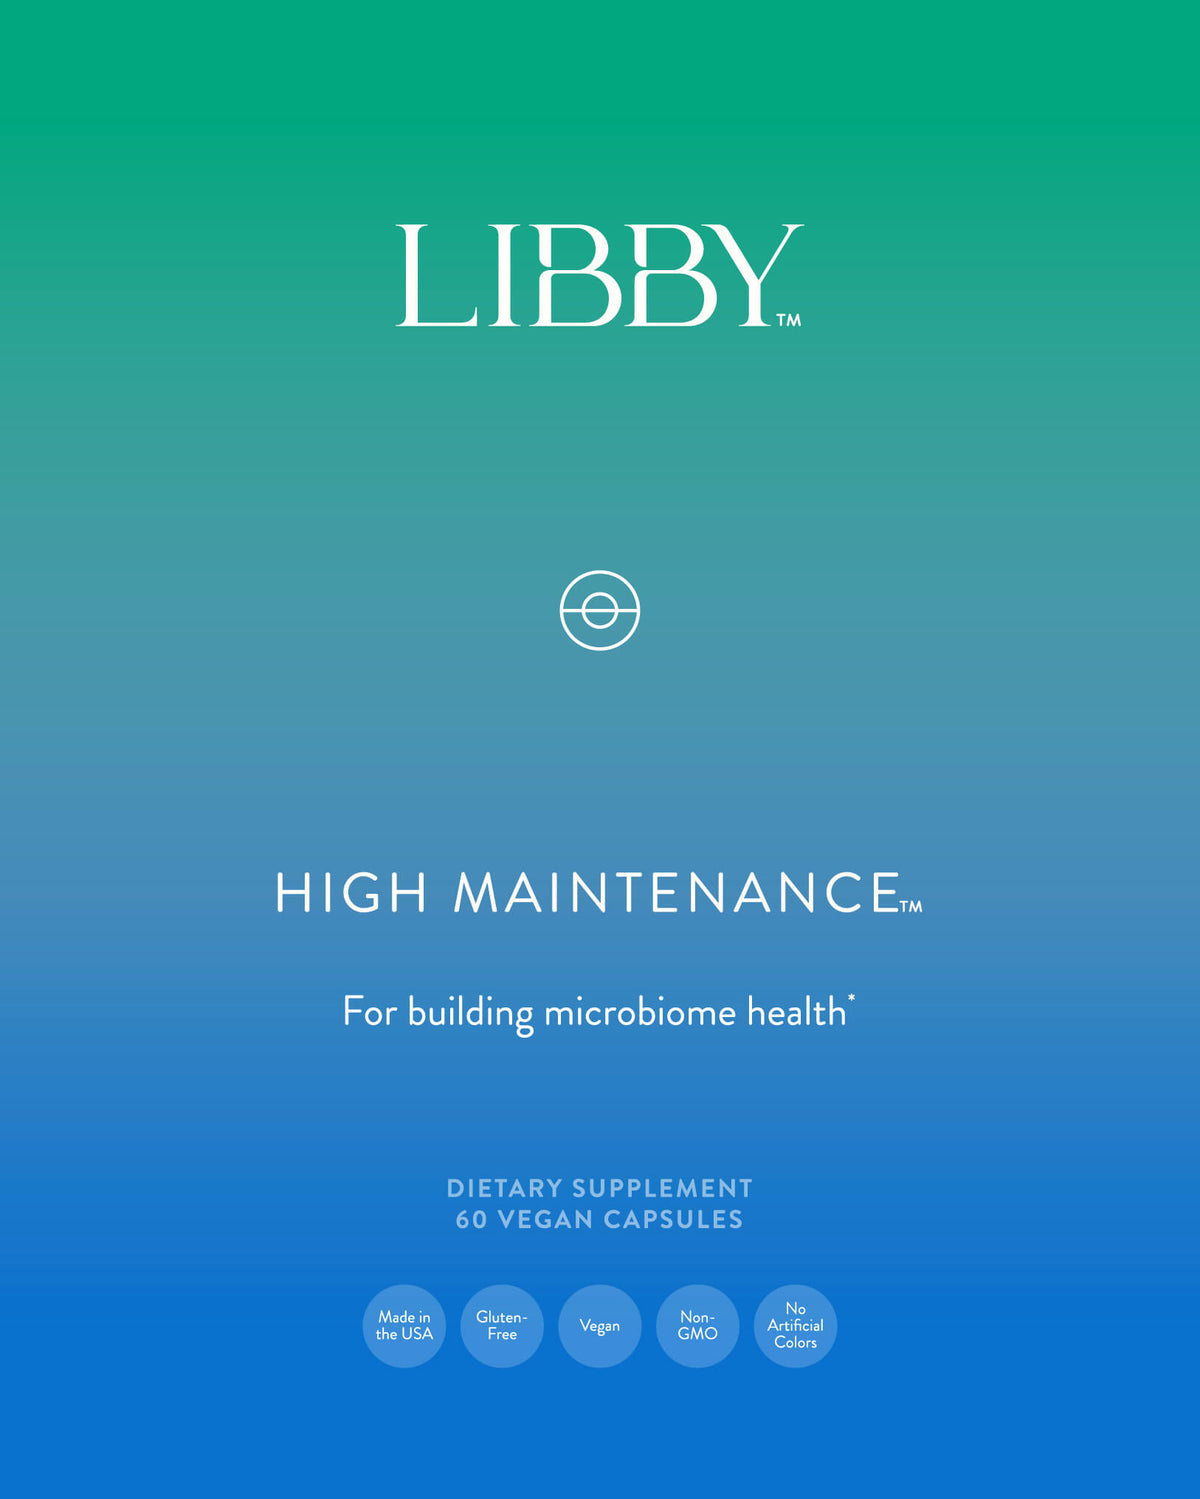 The Libby System - High Maintenance packaging label.